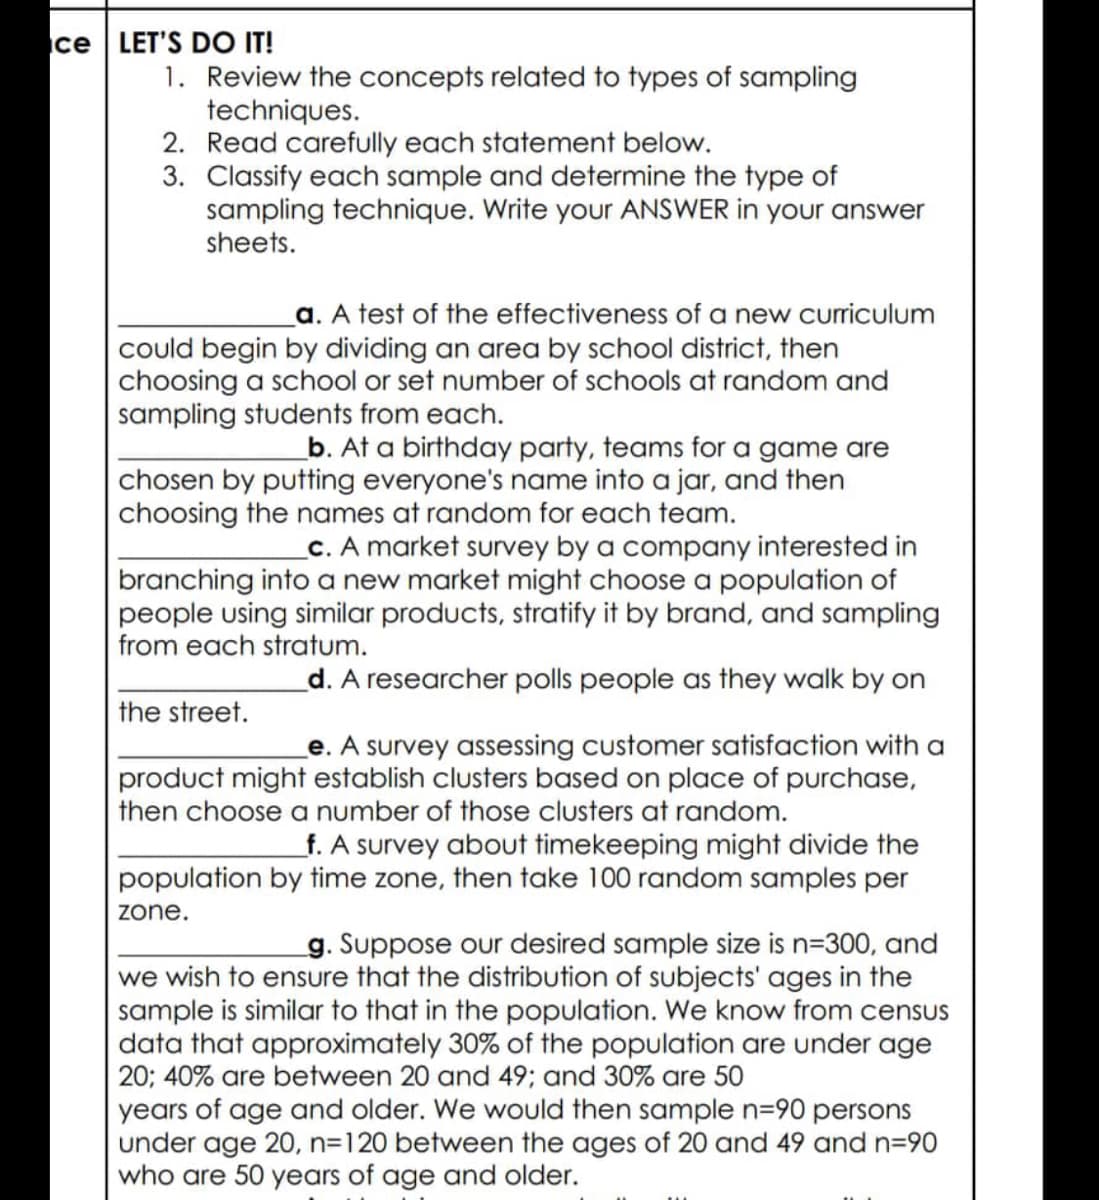 ce LET'S DO IT!
1. Review the concepts related to types of sampling
techniques.
2. Read carefully each statement below.
3. Classify each sample and determine the type of
sampling technique. Write your ANSWER in your answer
sheets.
a. A test of the effectiveness of a new curriculum
could begin by dividing an area by school district, then
choosing a school or set number of schools at random and
sampling students from each.
b. At a birthday party, teams for a game are
chosen by putting everyone's name into a jar, and then
choosing the names at random for each team.
_c. A market survey by a company interested in
branching into a new market might choose a population of
people using similar products, stratify it by brand, and sampling
from each stratum.
d. A researcher polls people as they walk by on
the street.
e. A survey assessing customer satisfaction with a
product might establish clusters based on place of purchase,
then choose a number of those clusters at random.
f. A survey about timekeeping might divide the
population by time zone, then take 100 random samples per
zone.
g. Suppose our desired sample size is n=300, and
we wish to ensure that the distribution of subjects' ages in the
sample is similar to that in the population. We know from census
data that approximately 30% of the population are under age
20; 40% are between 20 and 49; and 30% are 50
years of age and older. We would then sample n=90 persons
under age 20, n=120 between the ages of 20 and 49 and n=90
who are 50 years of age and older.